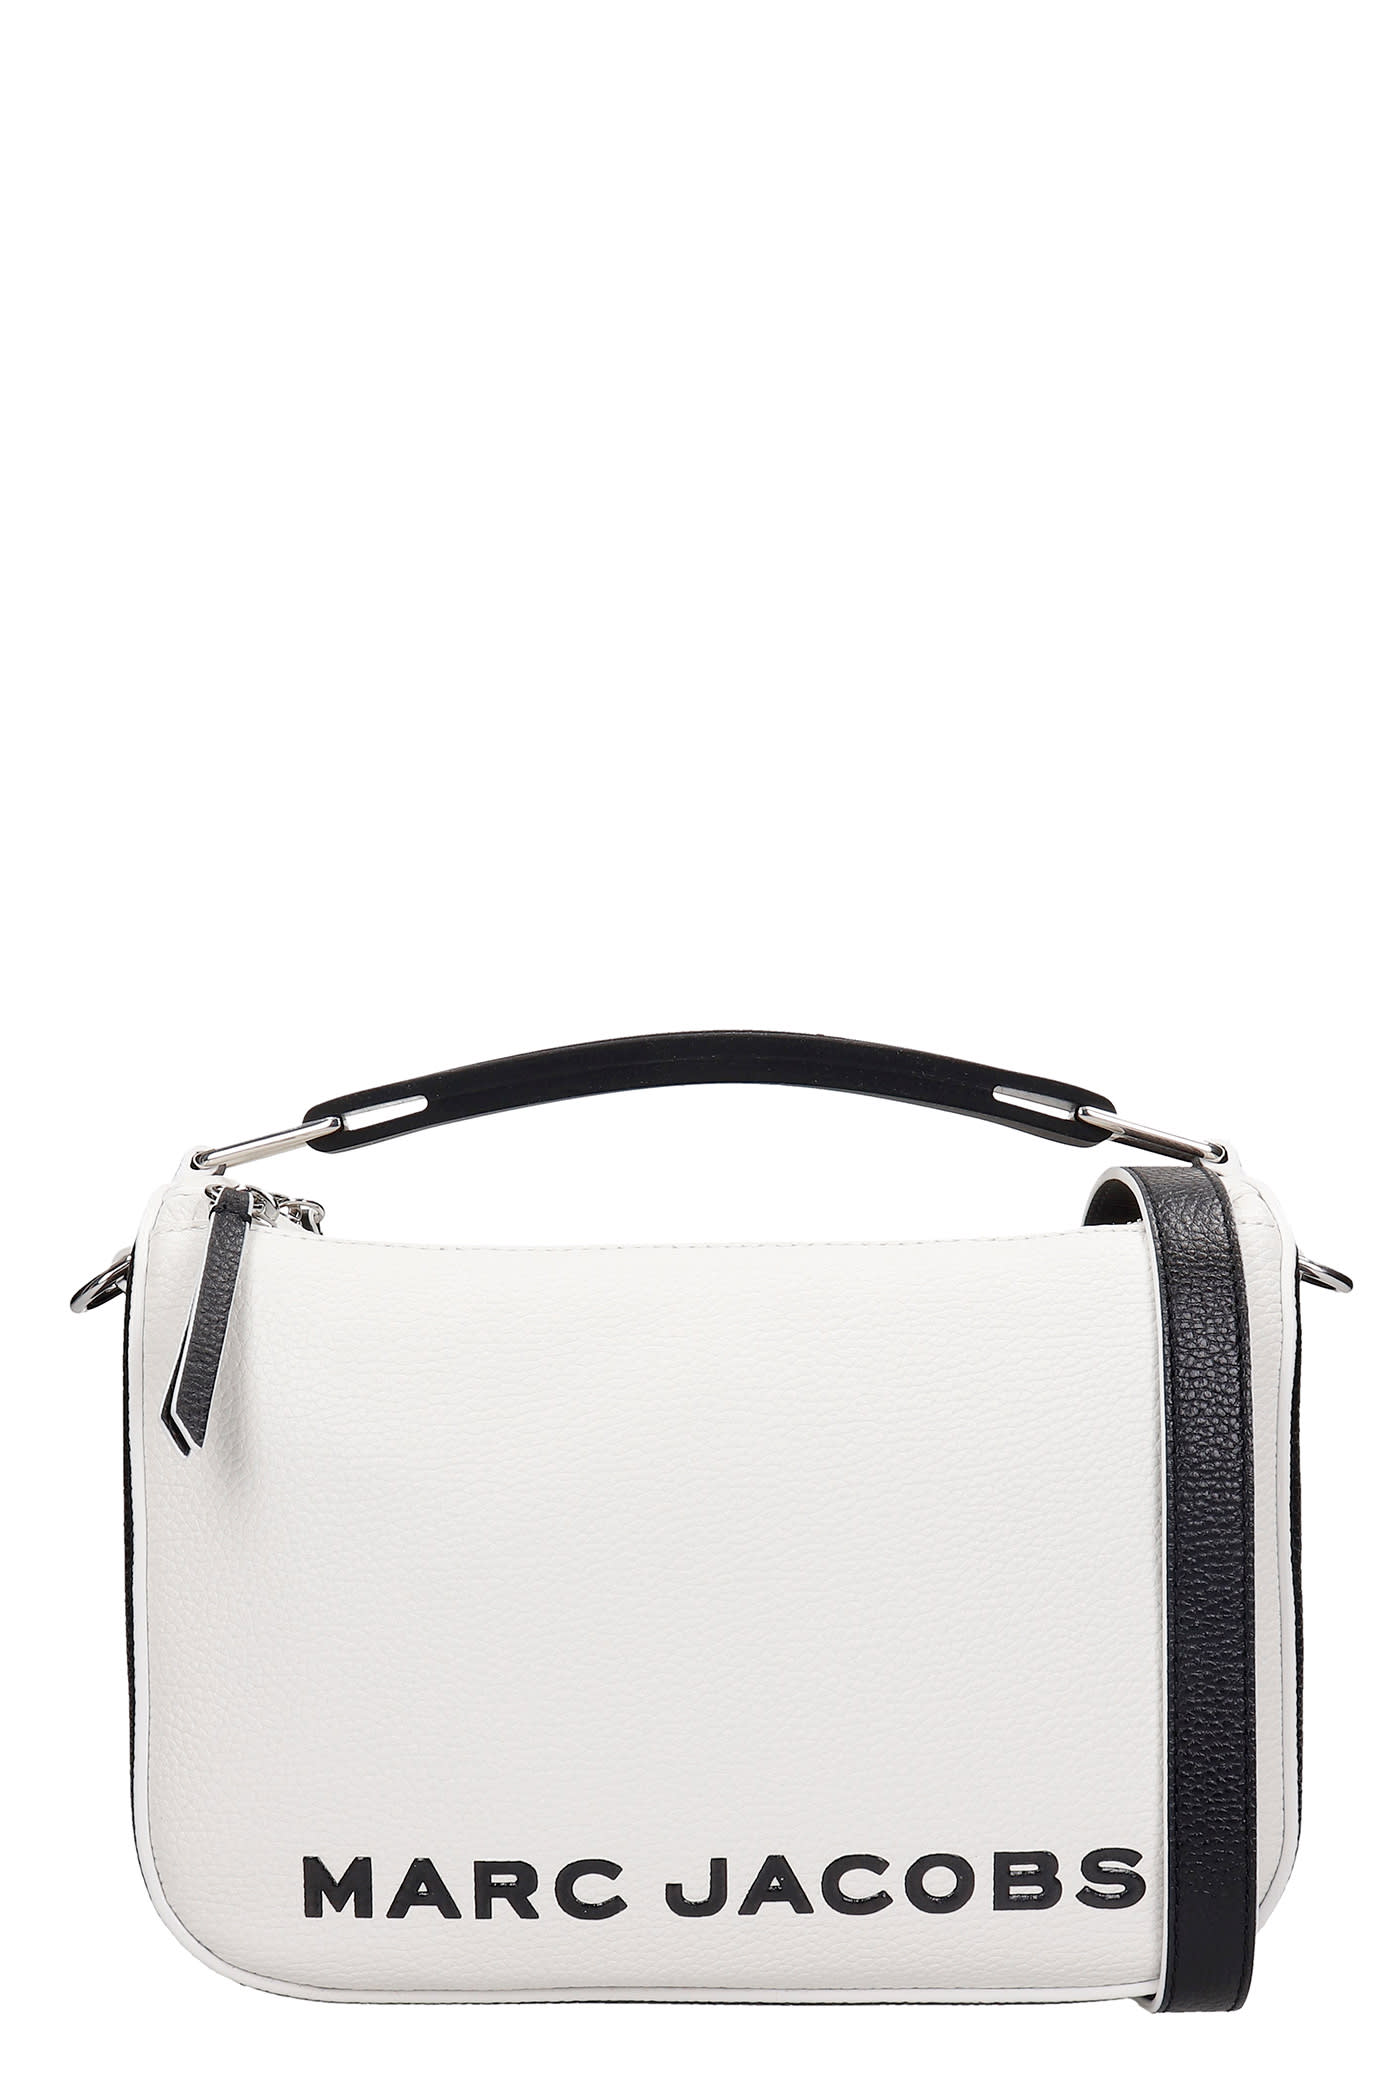 Marc Jacobs Hand Bag In Multicolor Leather